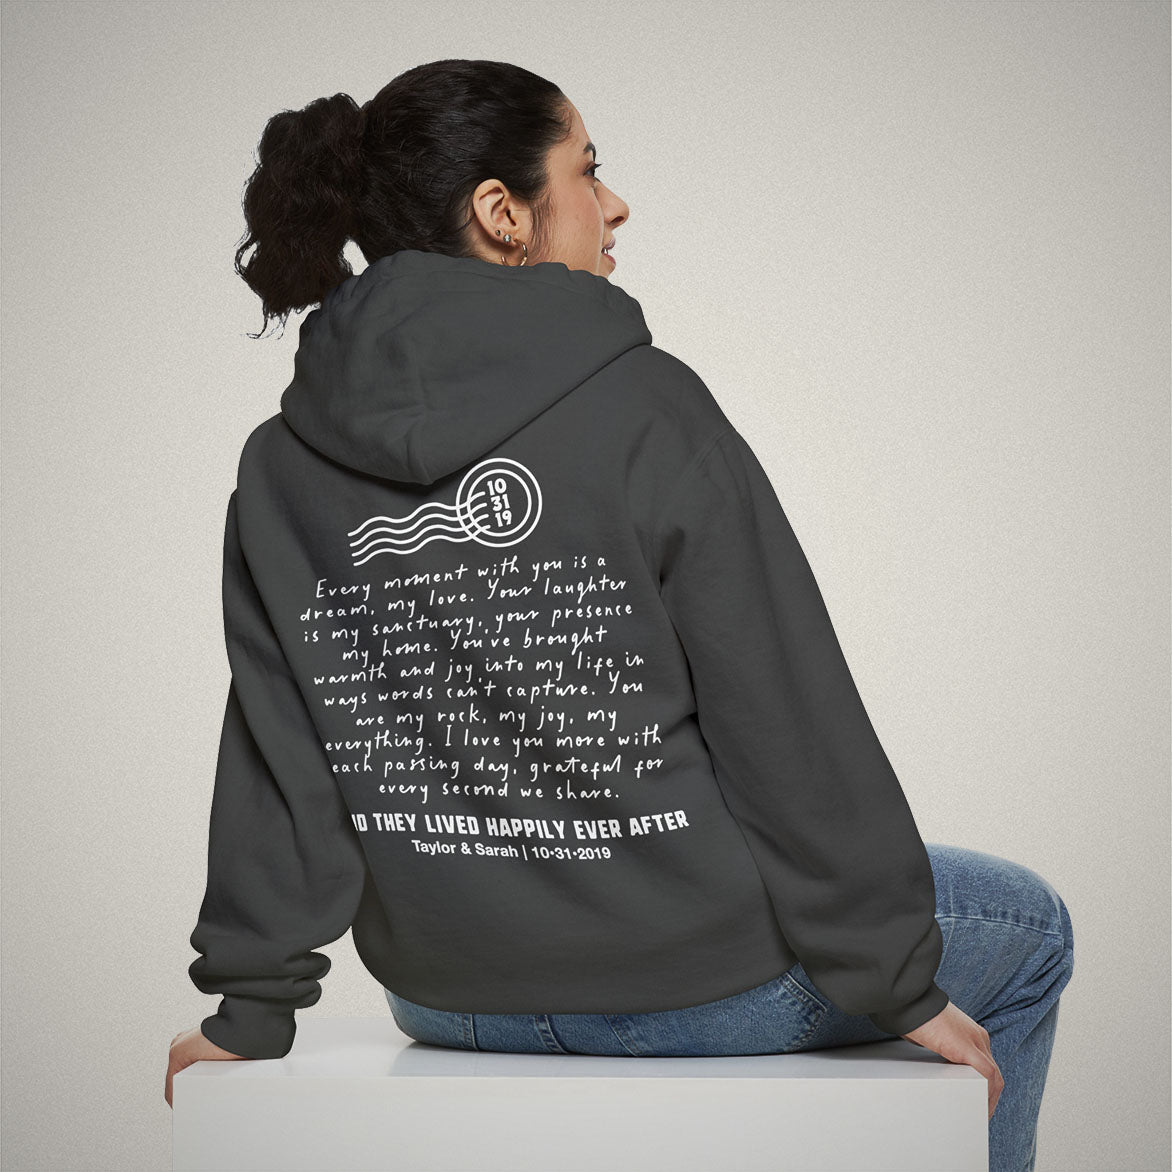 Love Letter Unisex Garment-Dyed Hoodie